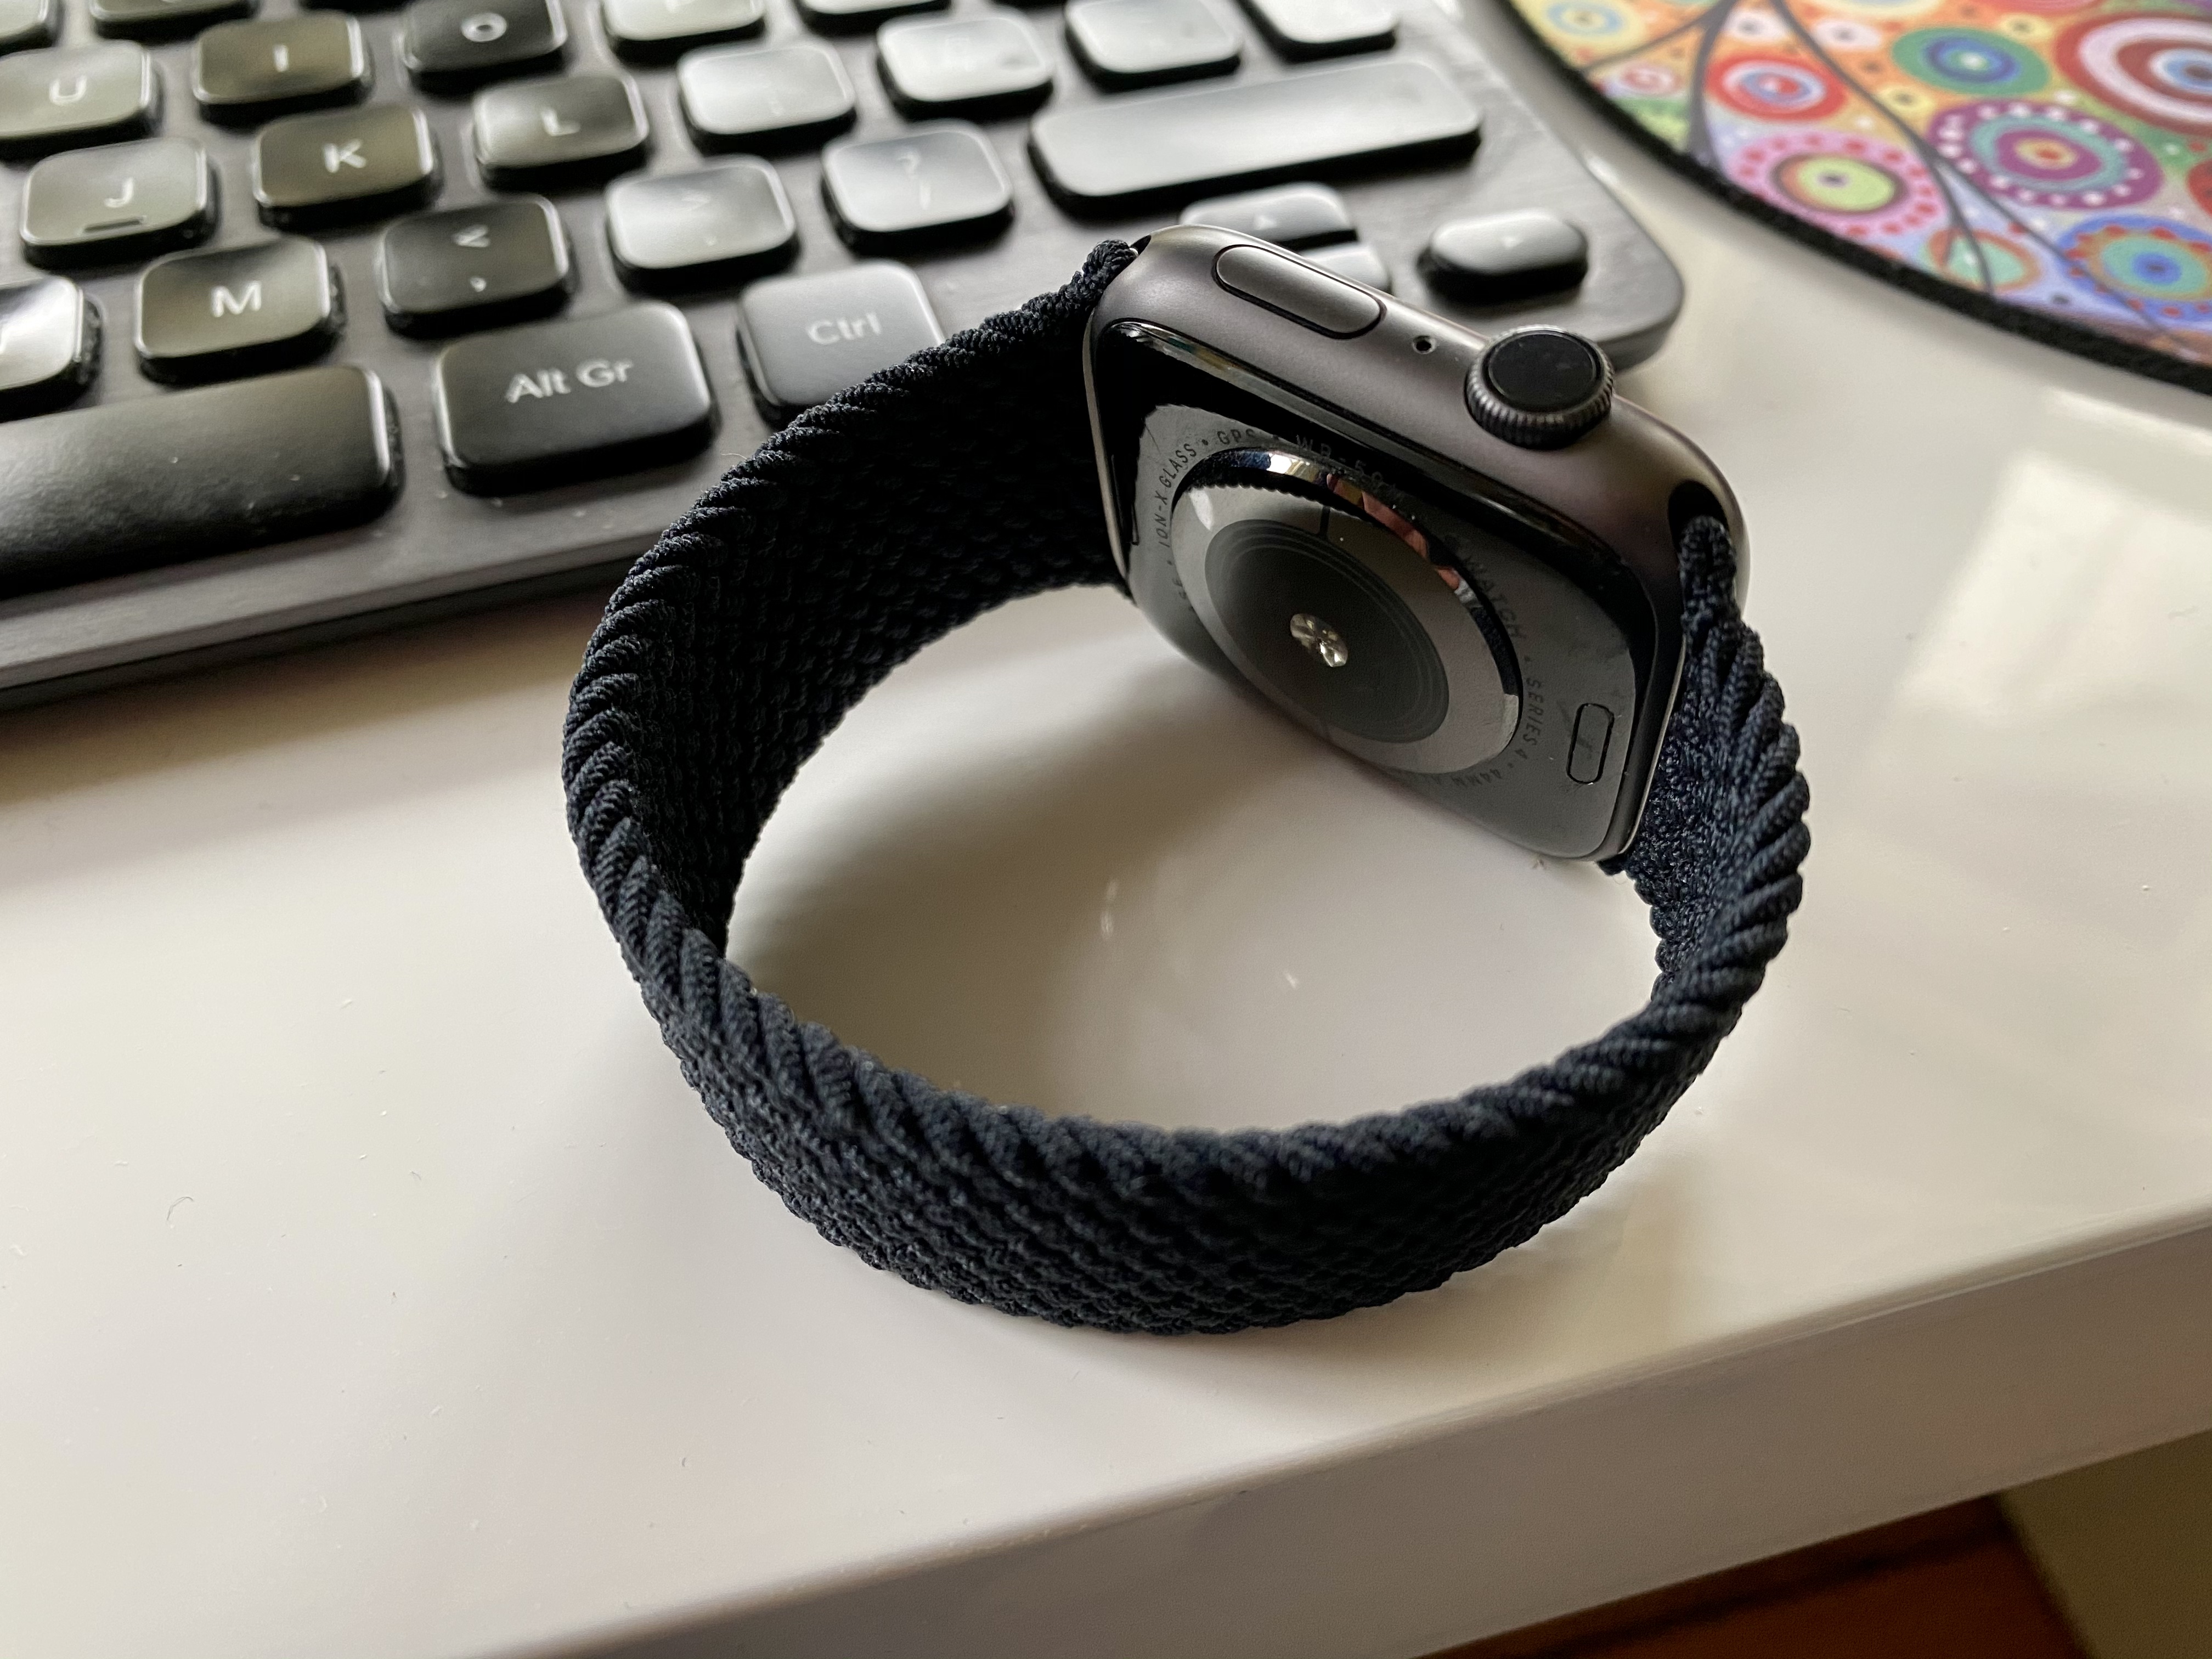 How To Correctly Measure Your Wrist For Apple Watch Solo Loop Bands